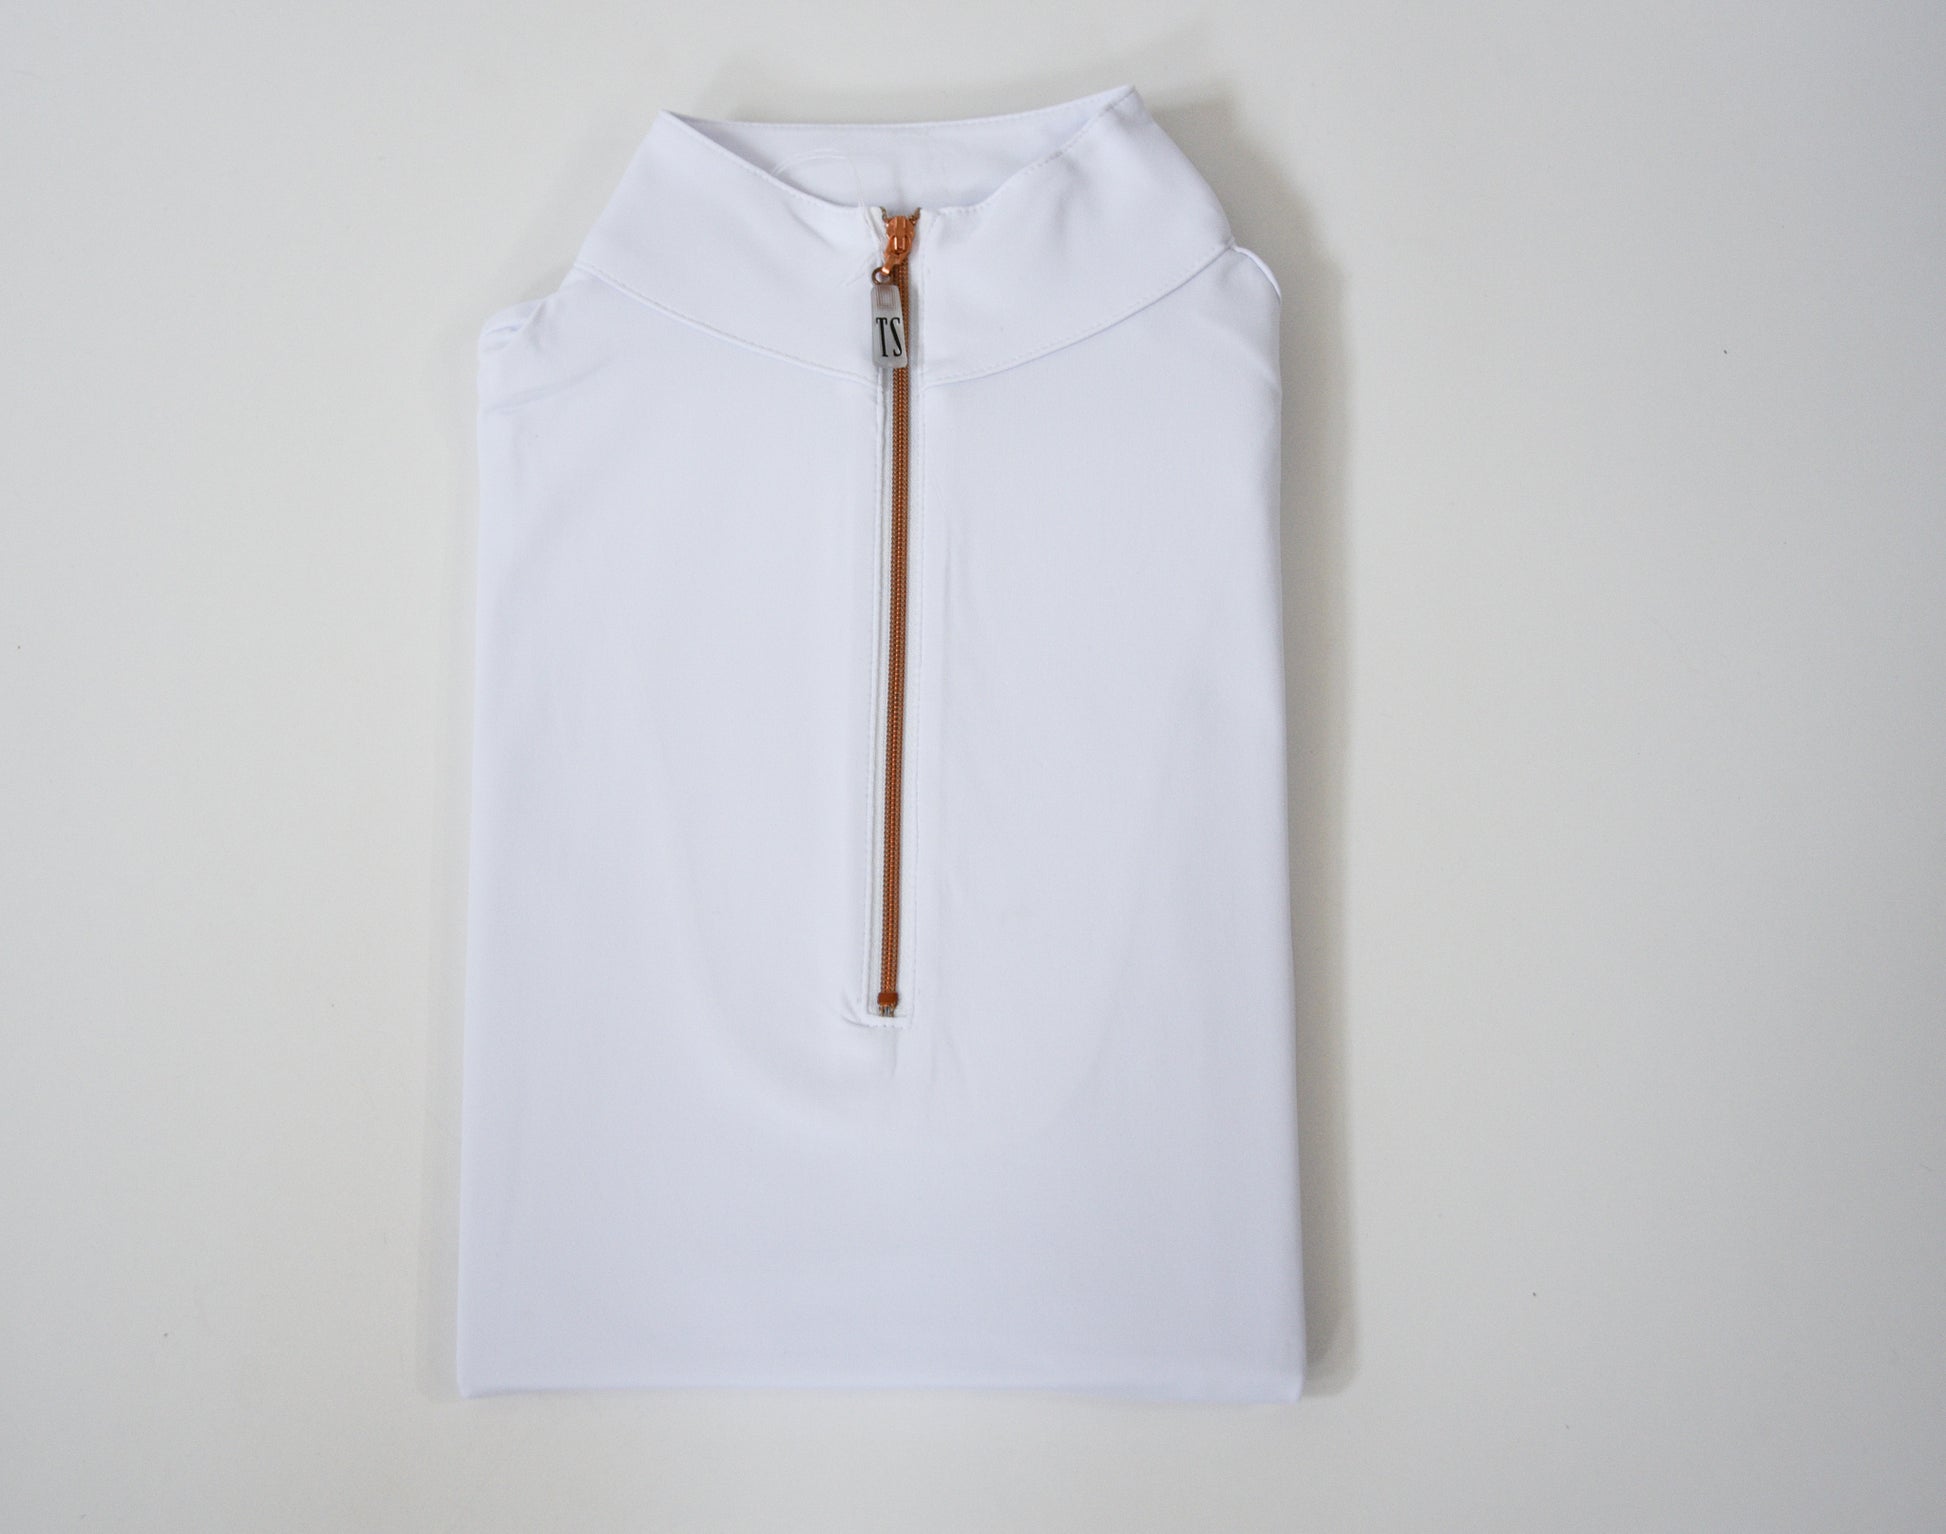 Tailored Sportsman White and Rose Gold Sun Shirt